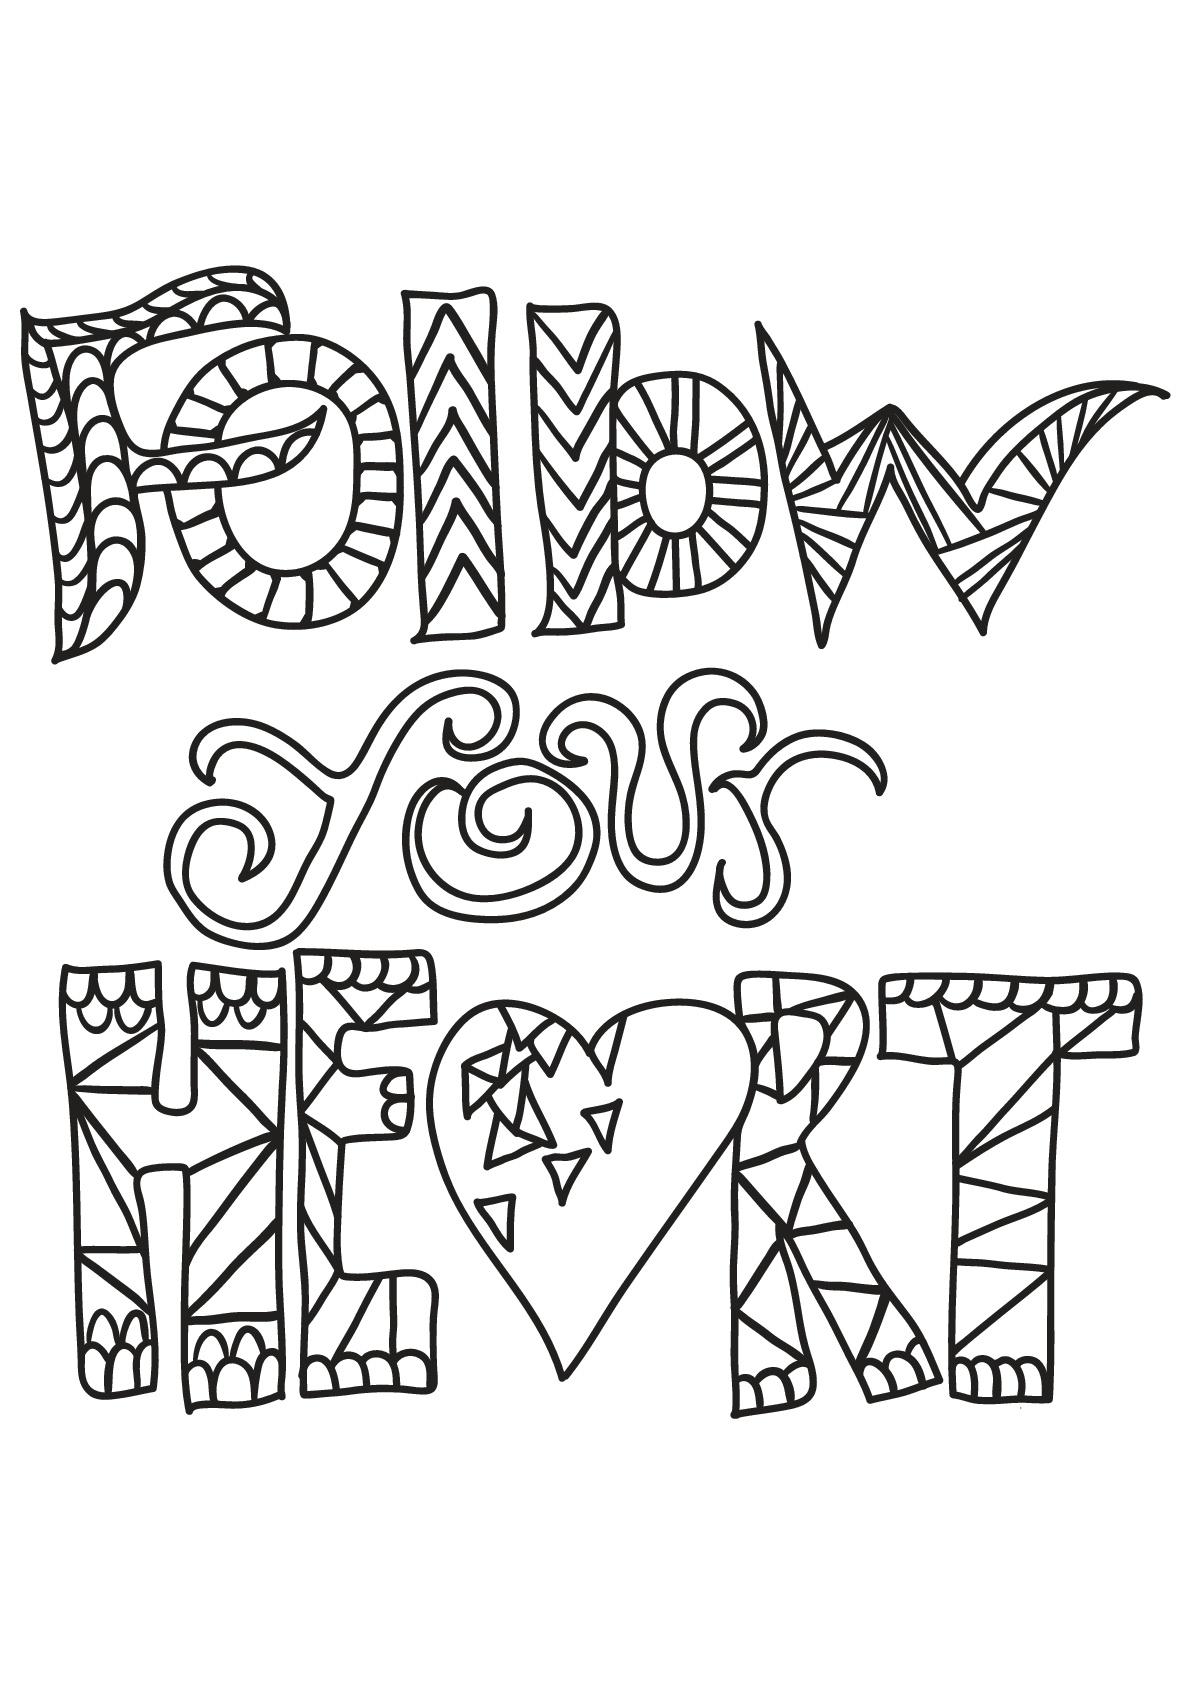 10 Of the Best Ideas for Printable Adult Coloring Pages Quotes - Best